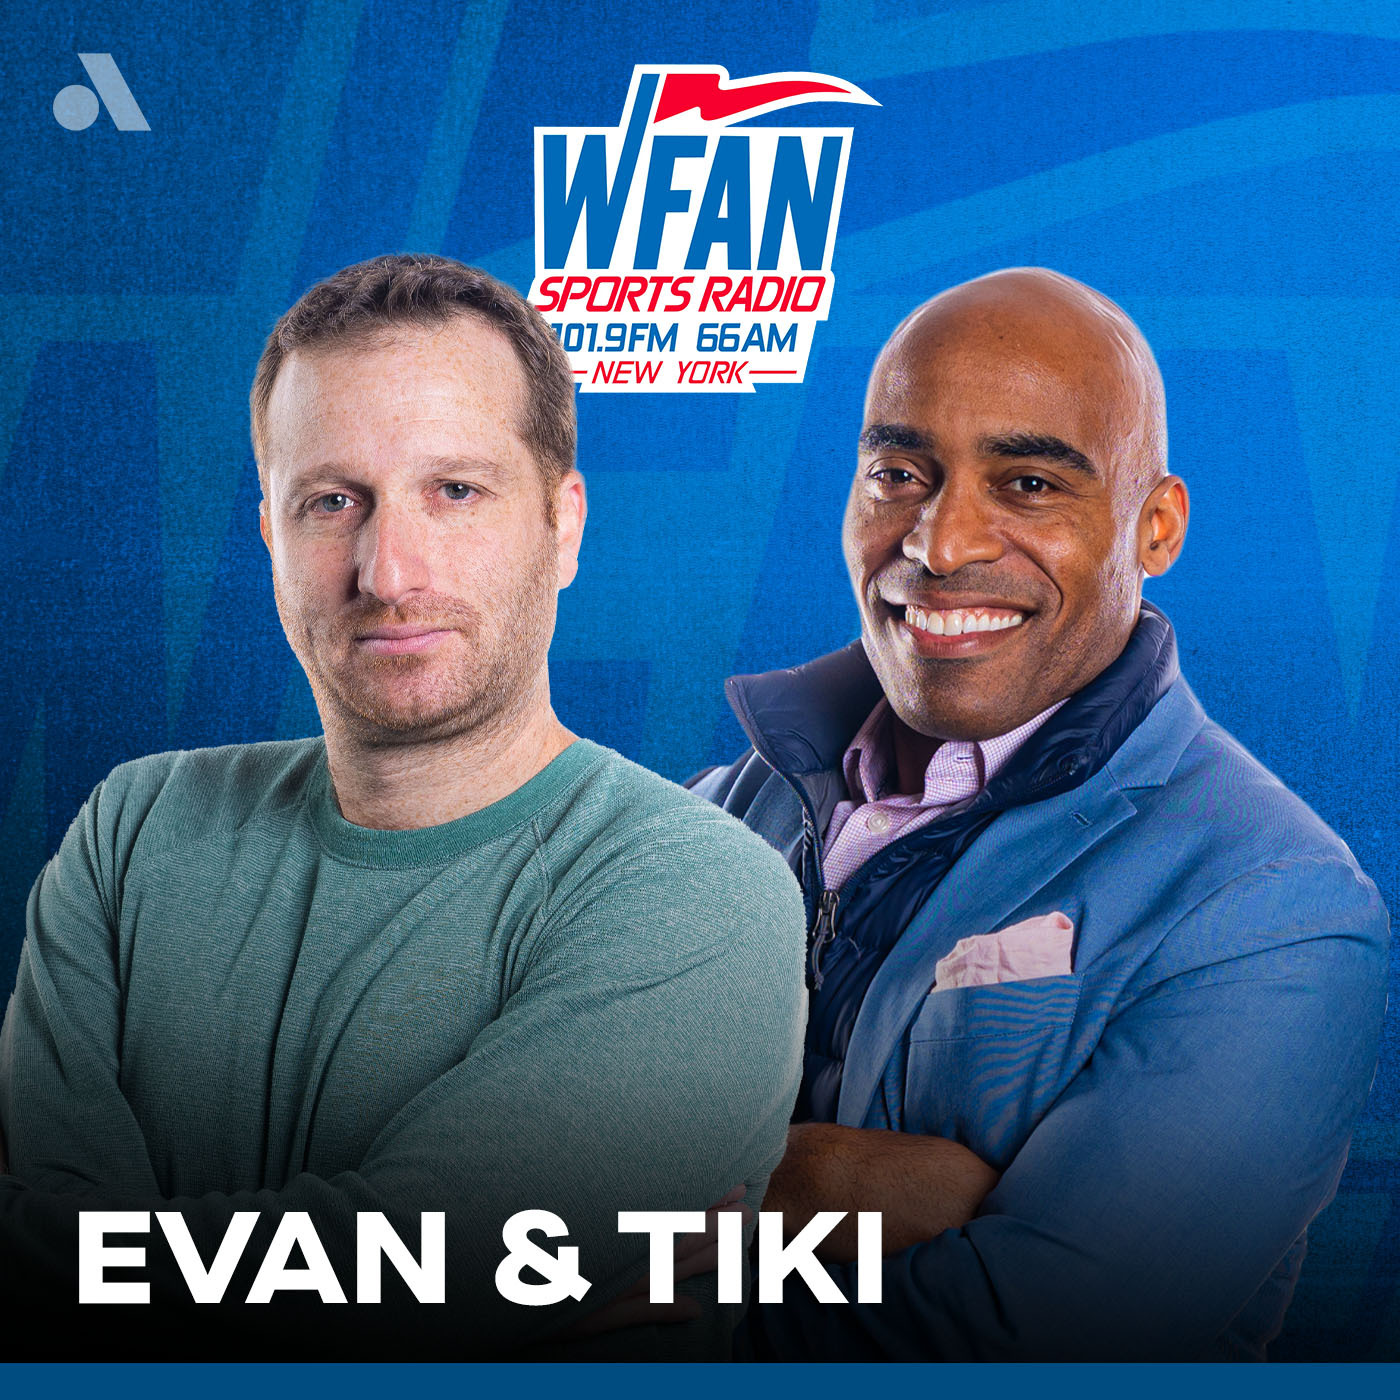 Evan and Tiki are Live From the Jersey Shore!